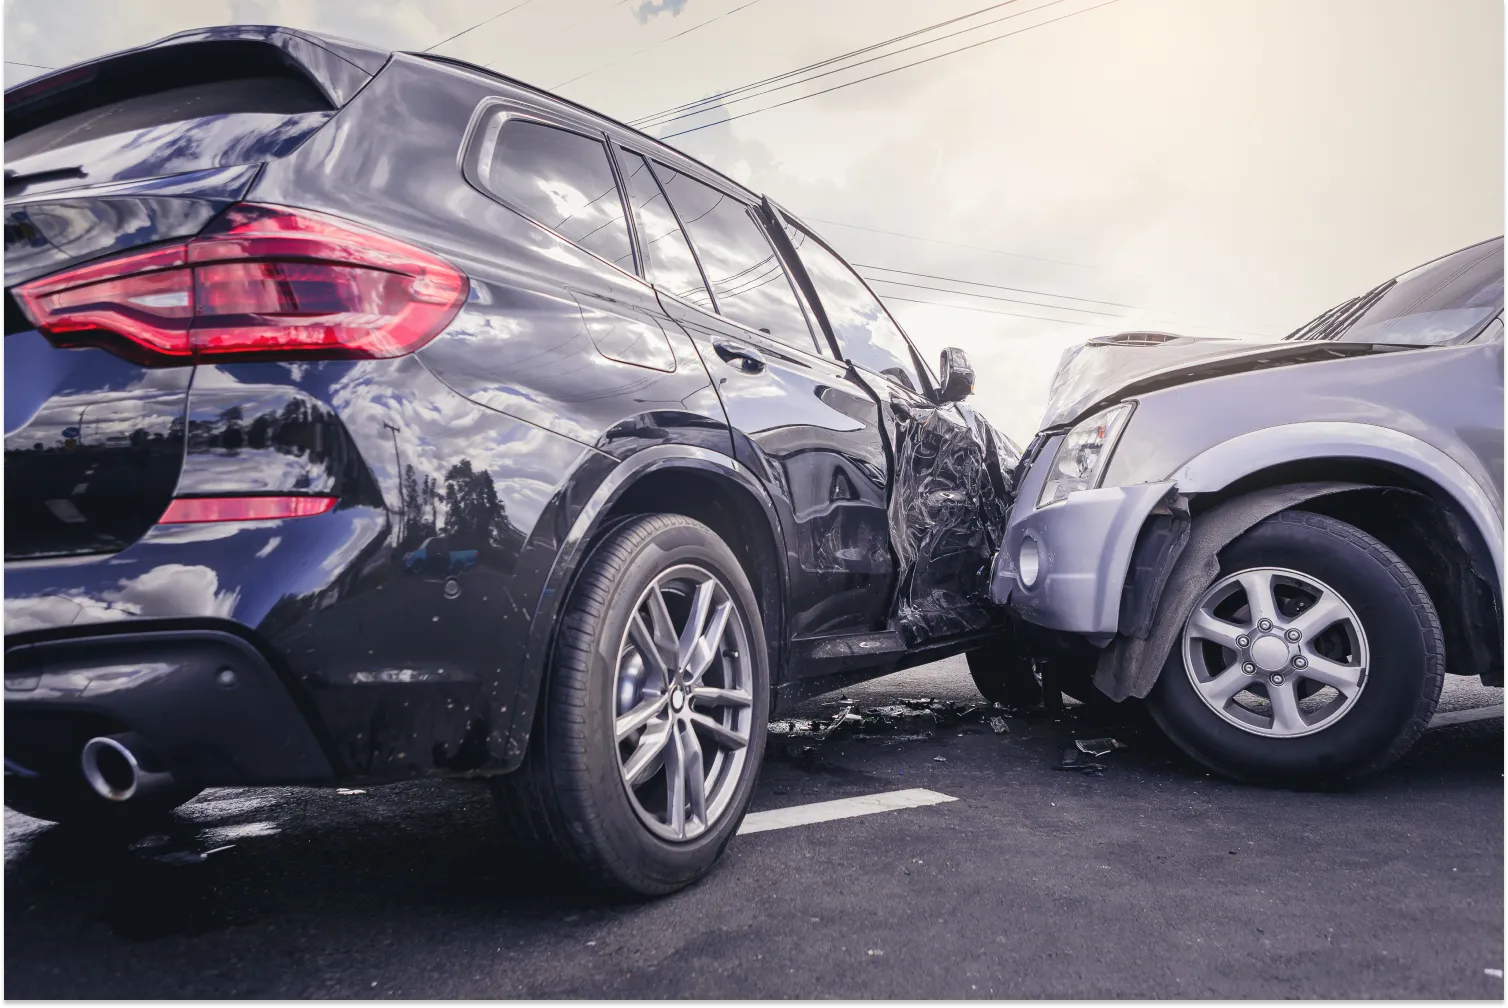 How Long After A Car Accident Can You Claim Injury?